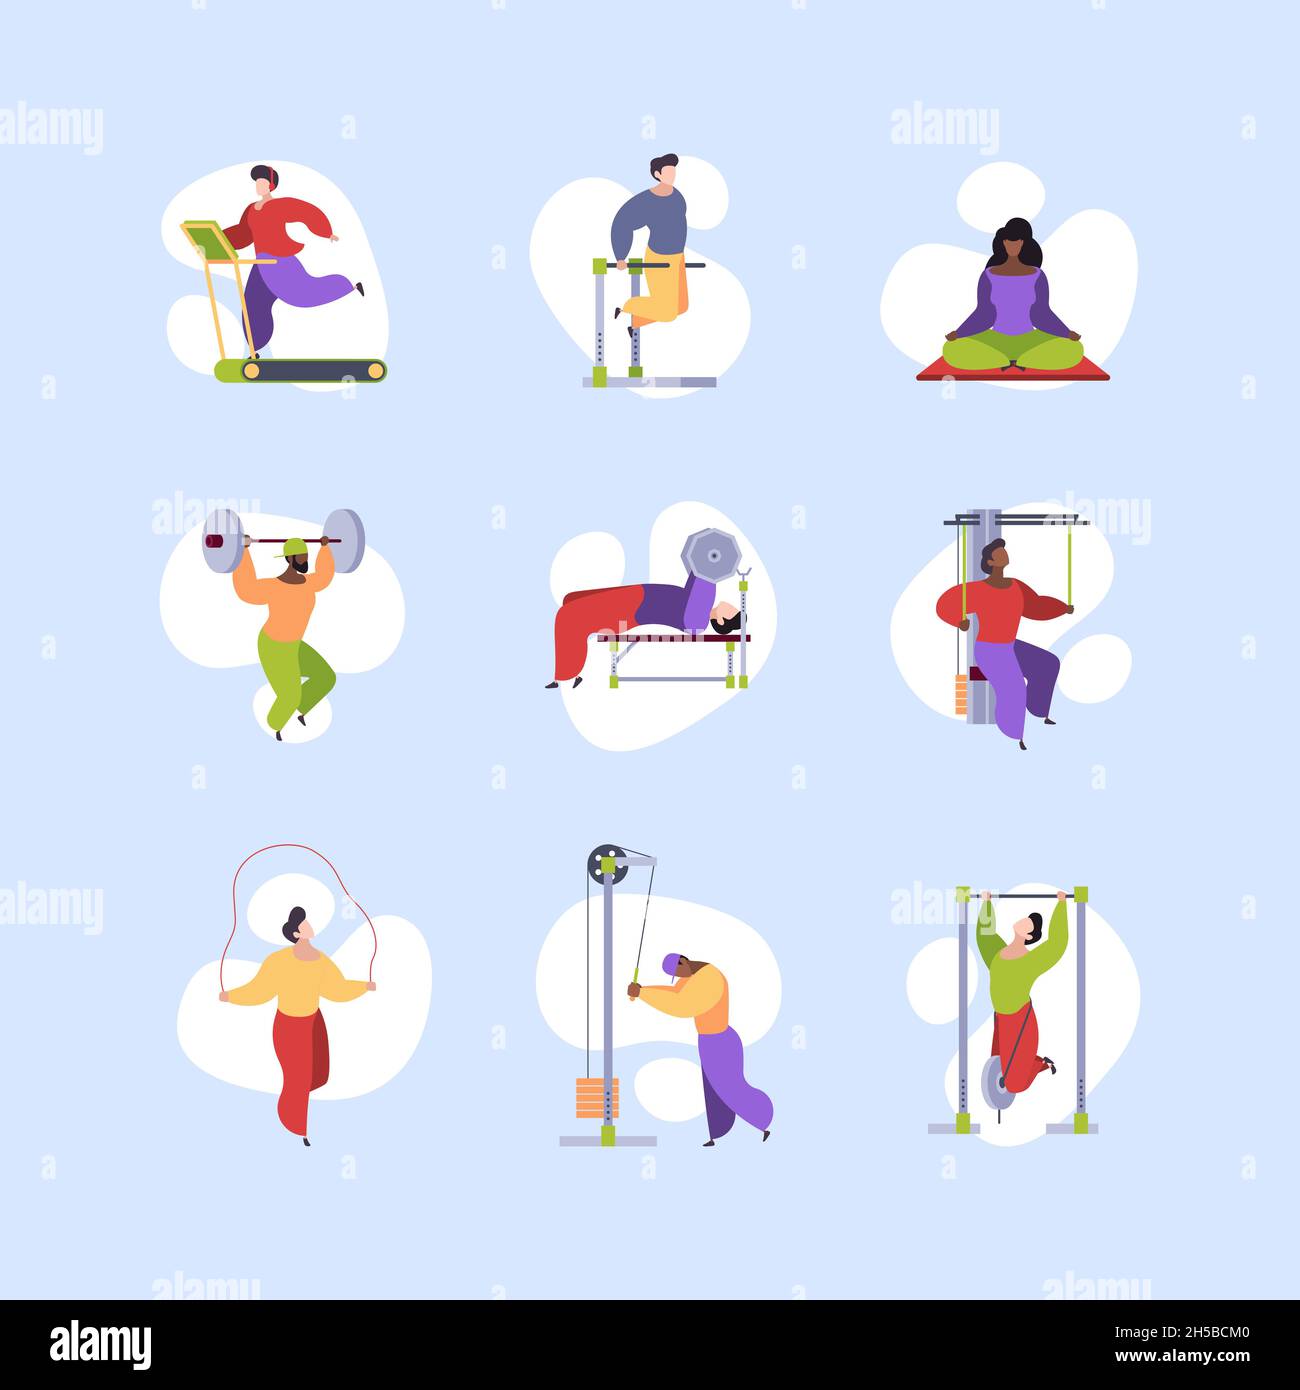 Sport characters. Healthy lifestyle people making daily exercises activity in park yoga gym cycling jogging garish vector flat illustrations Stock Vector